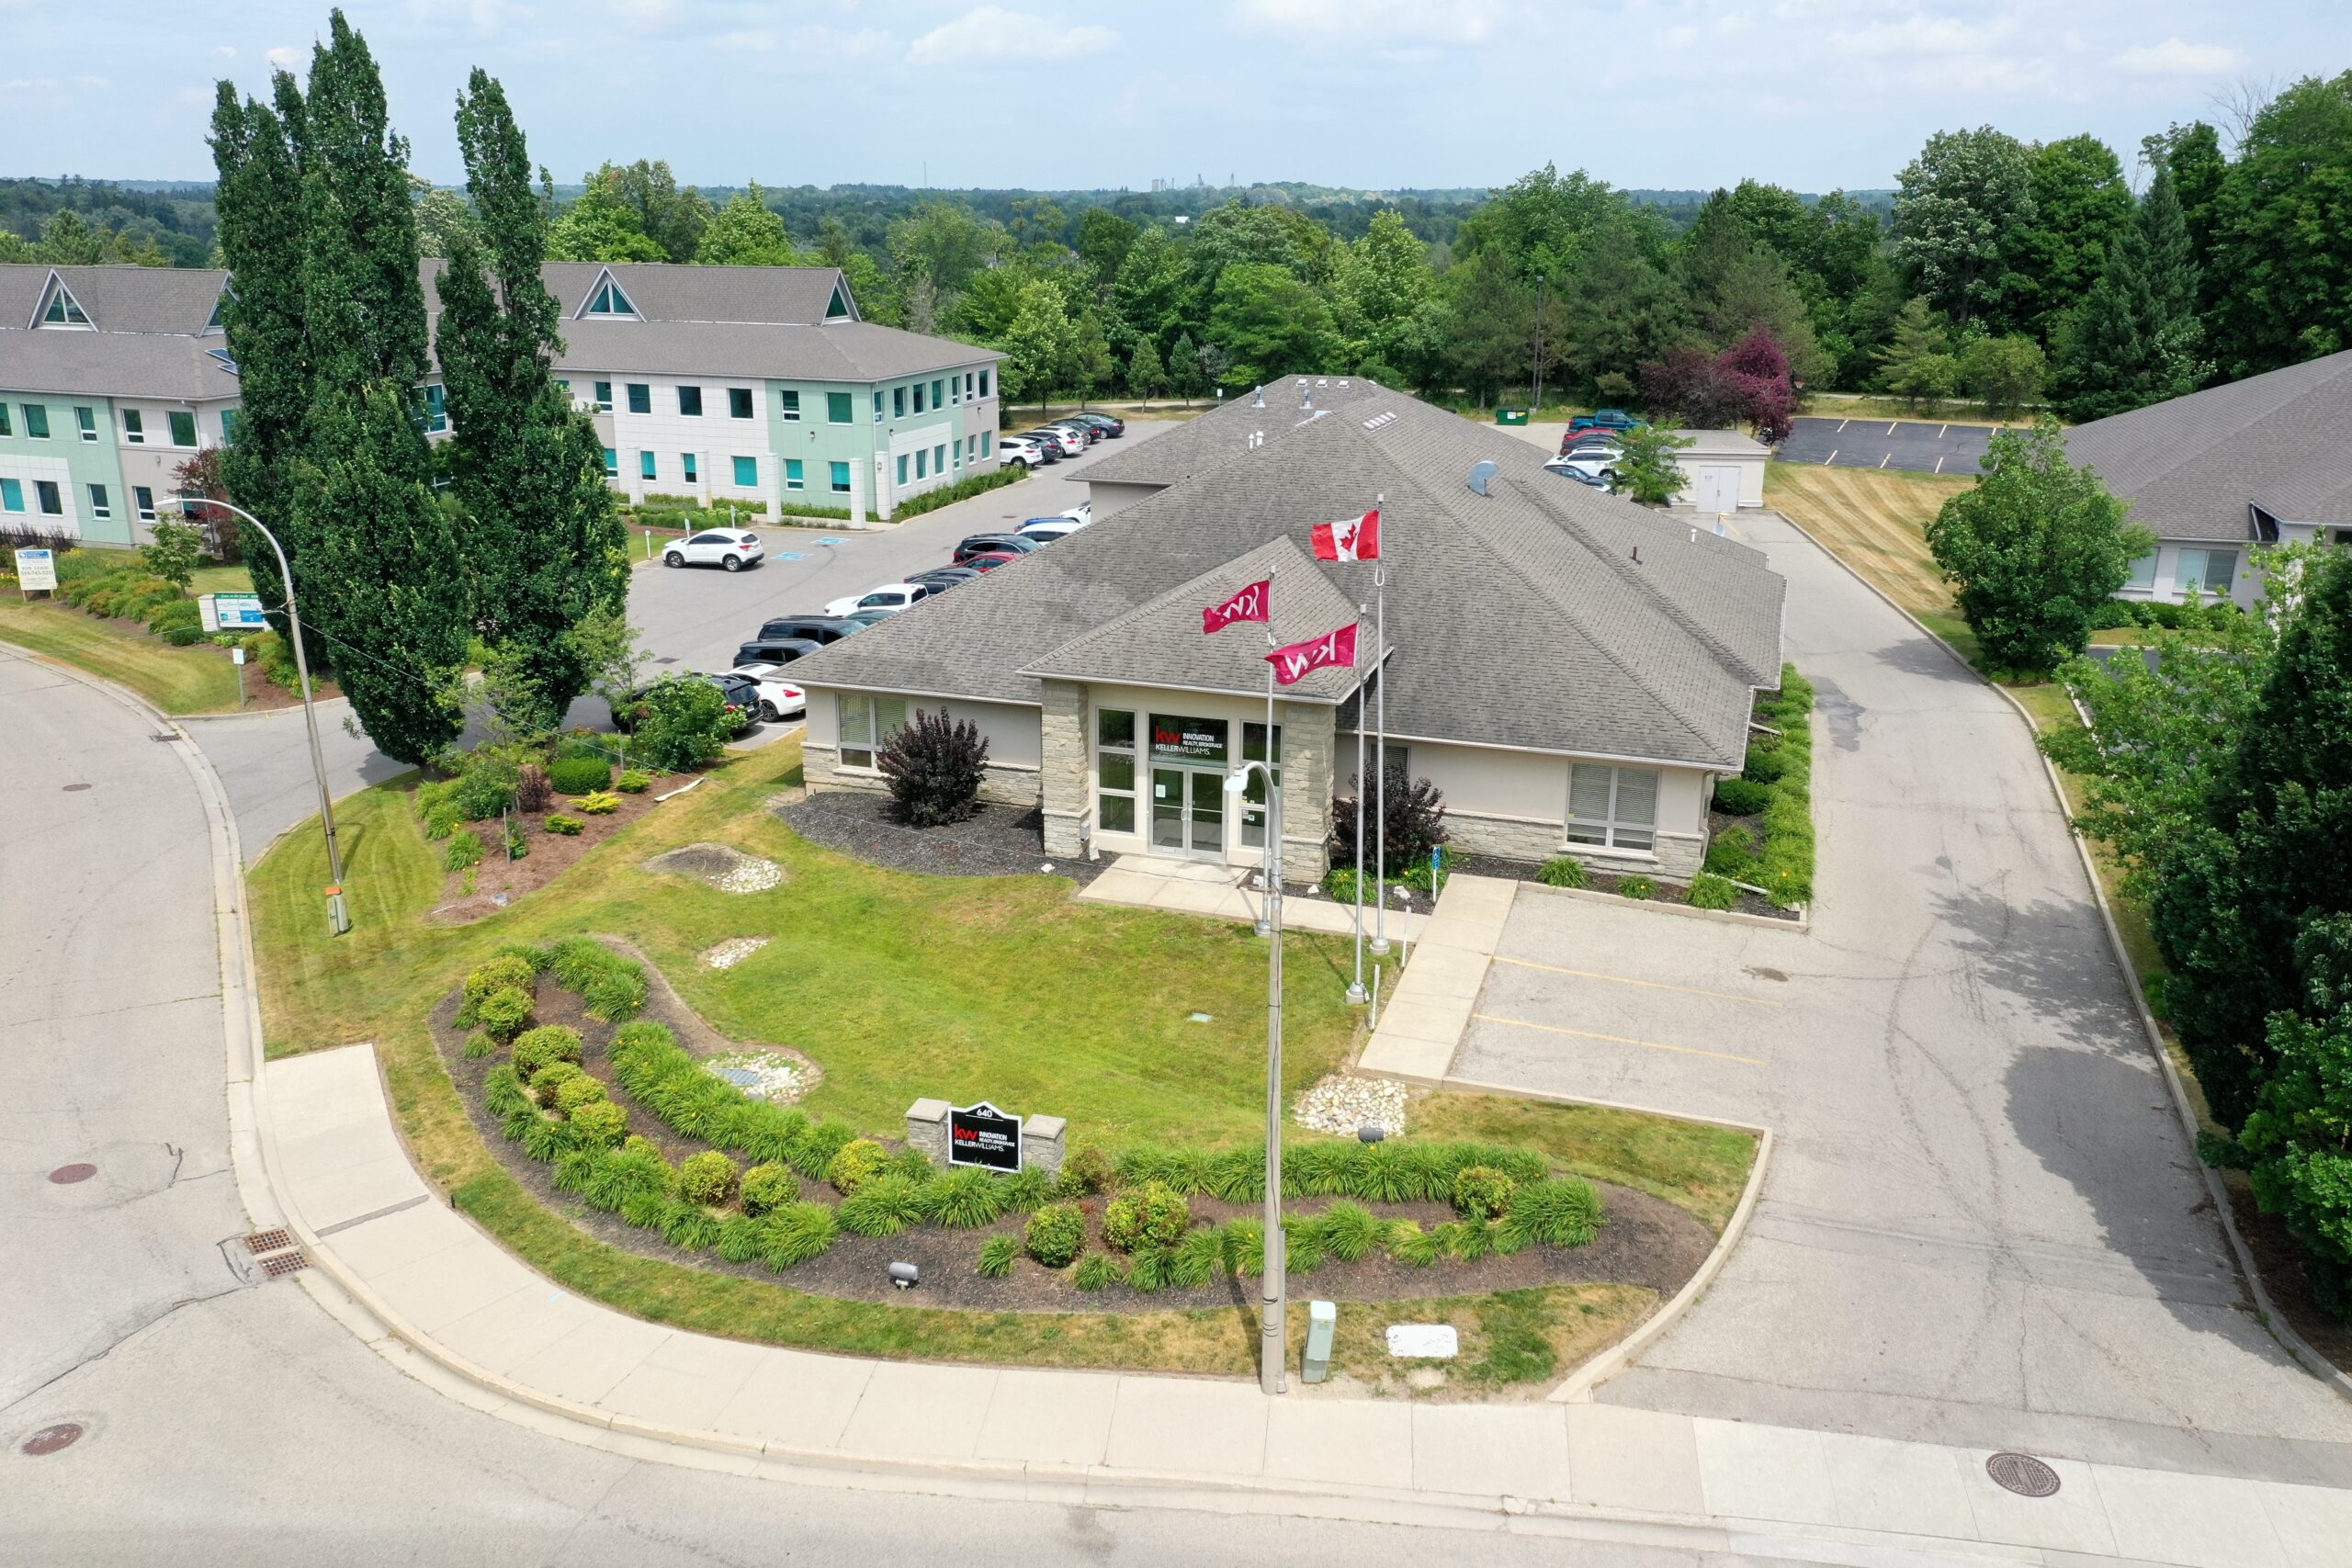 640 Riverbend Drive, Kitchener | Move In Ready Office Building SOLD